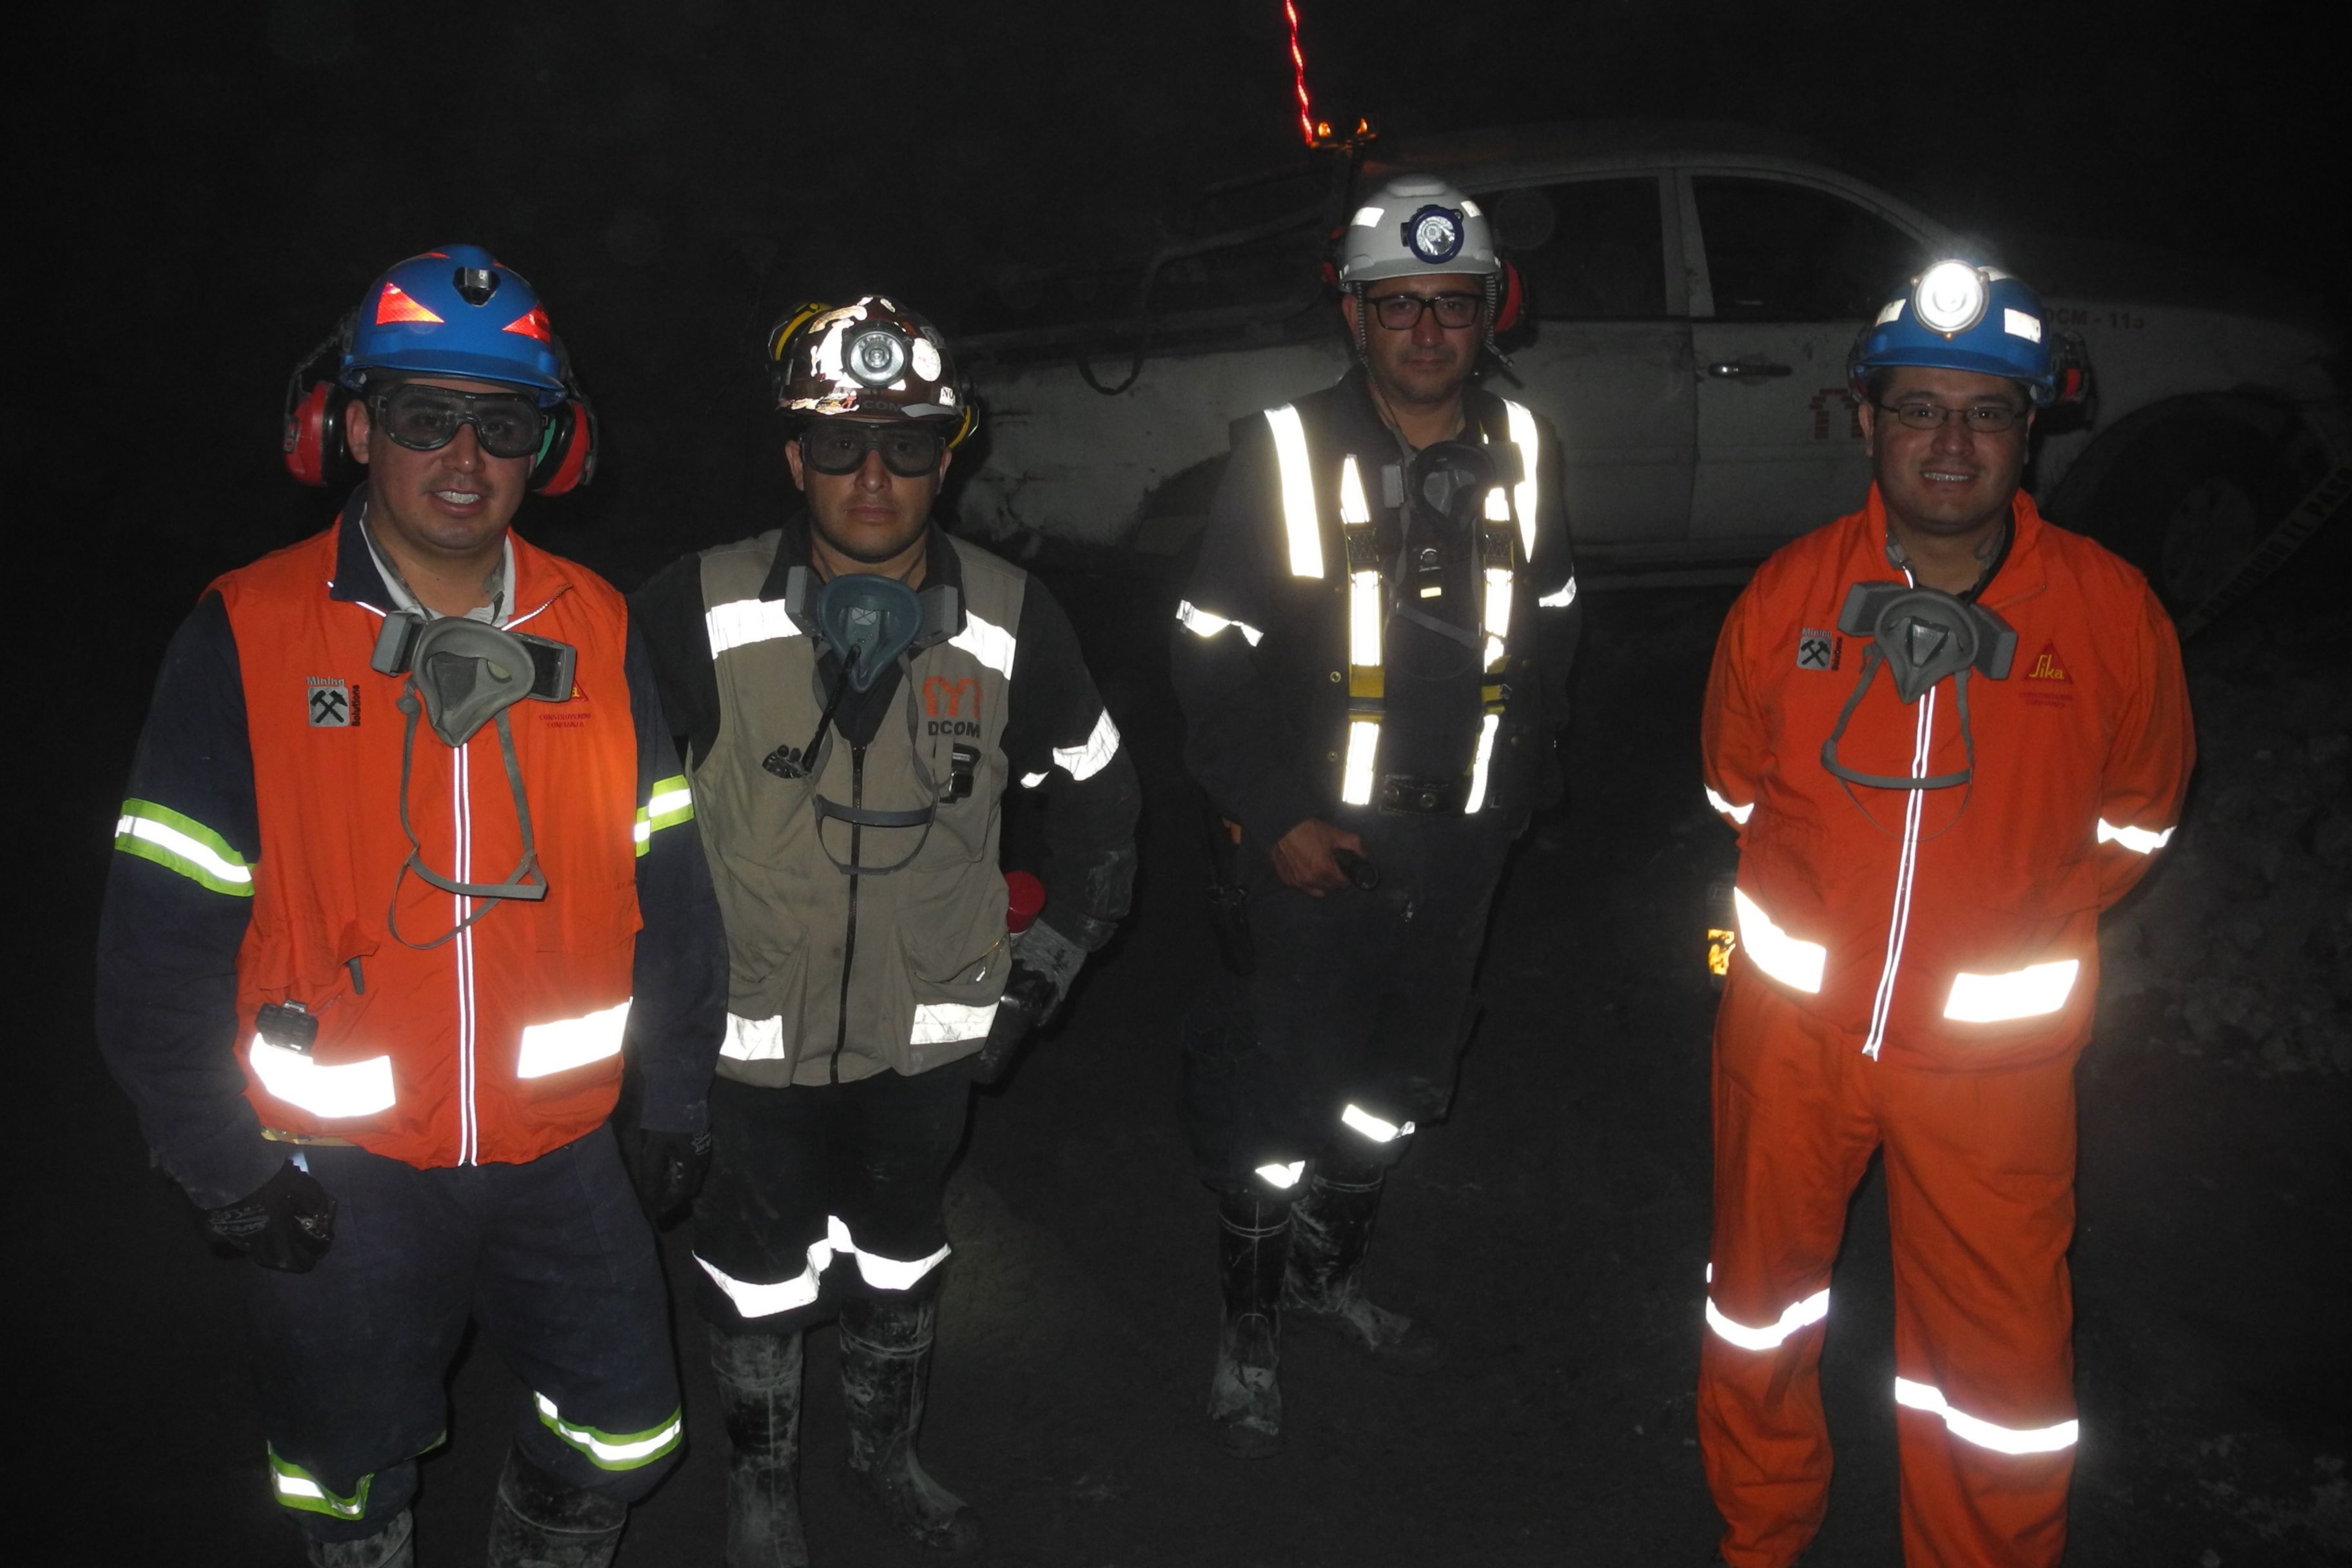 Construction workers in a silver mine in the Meixcan Heartland